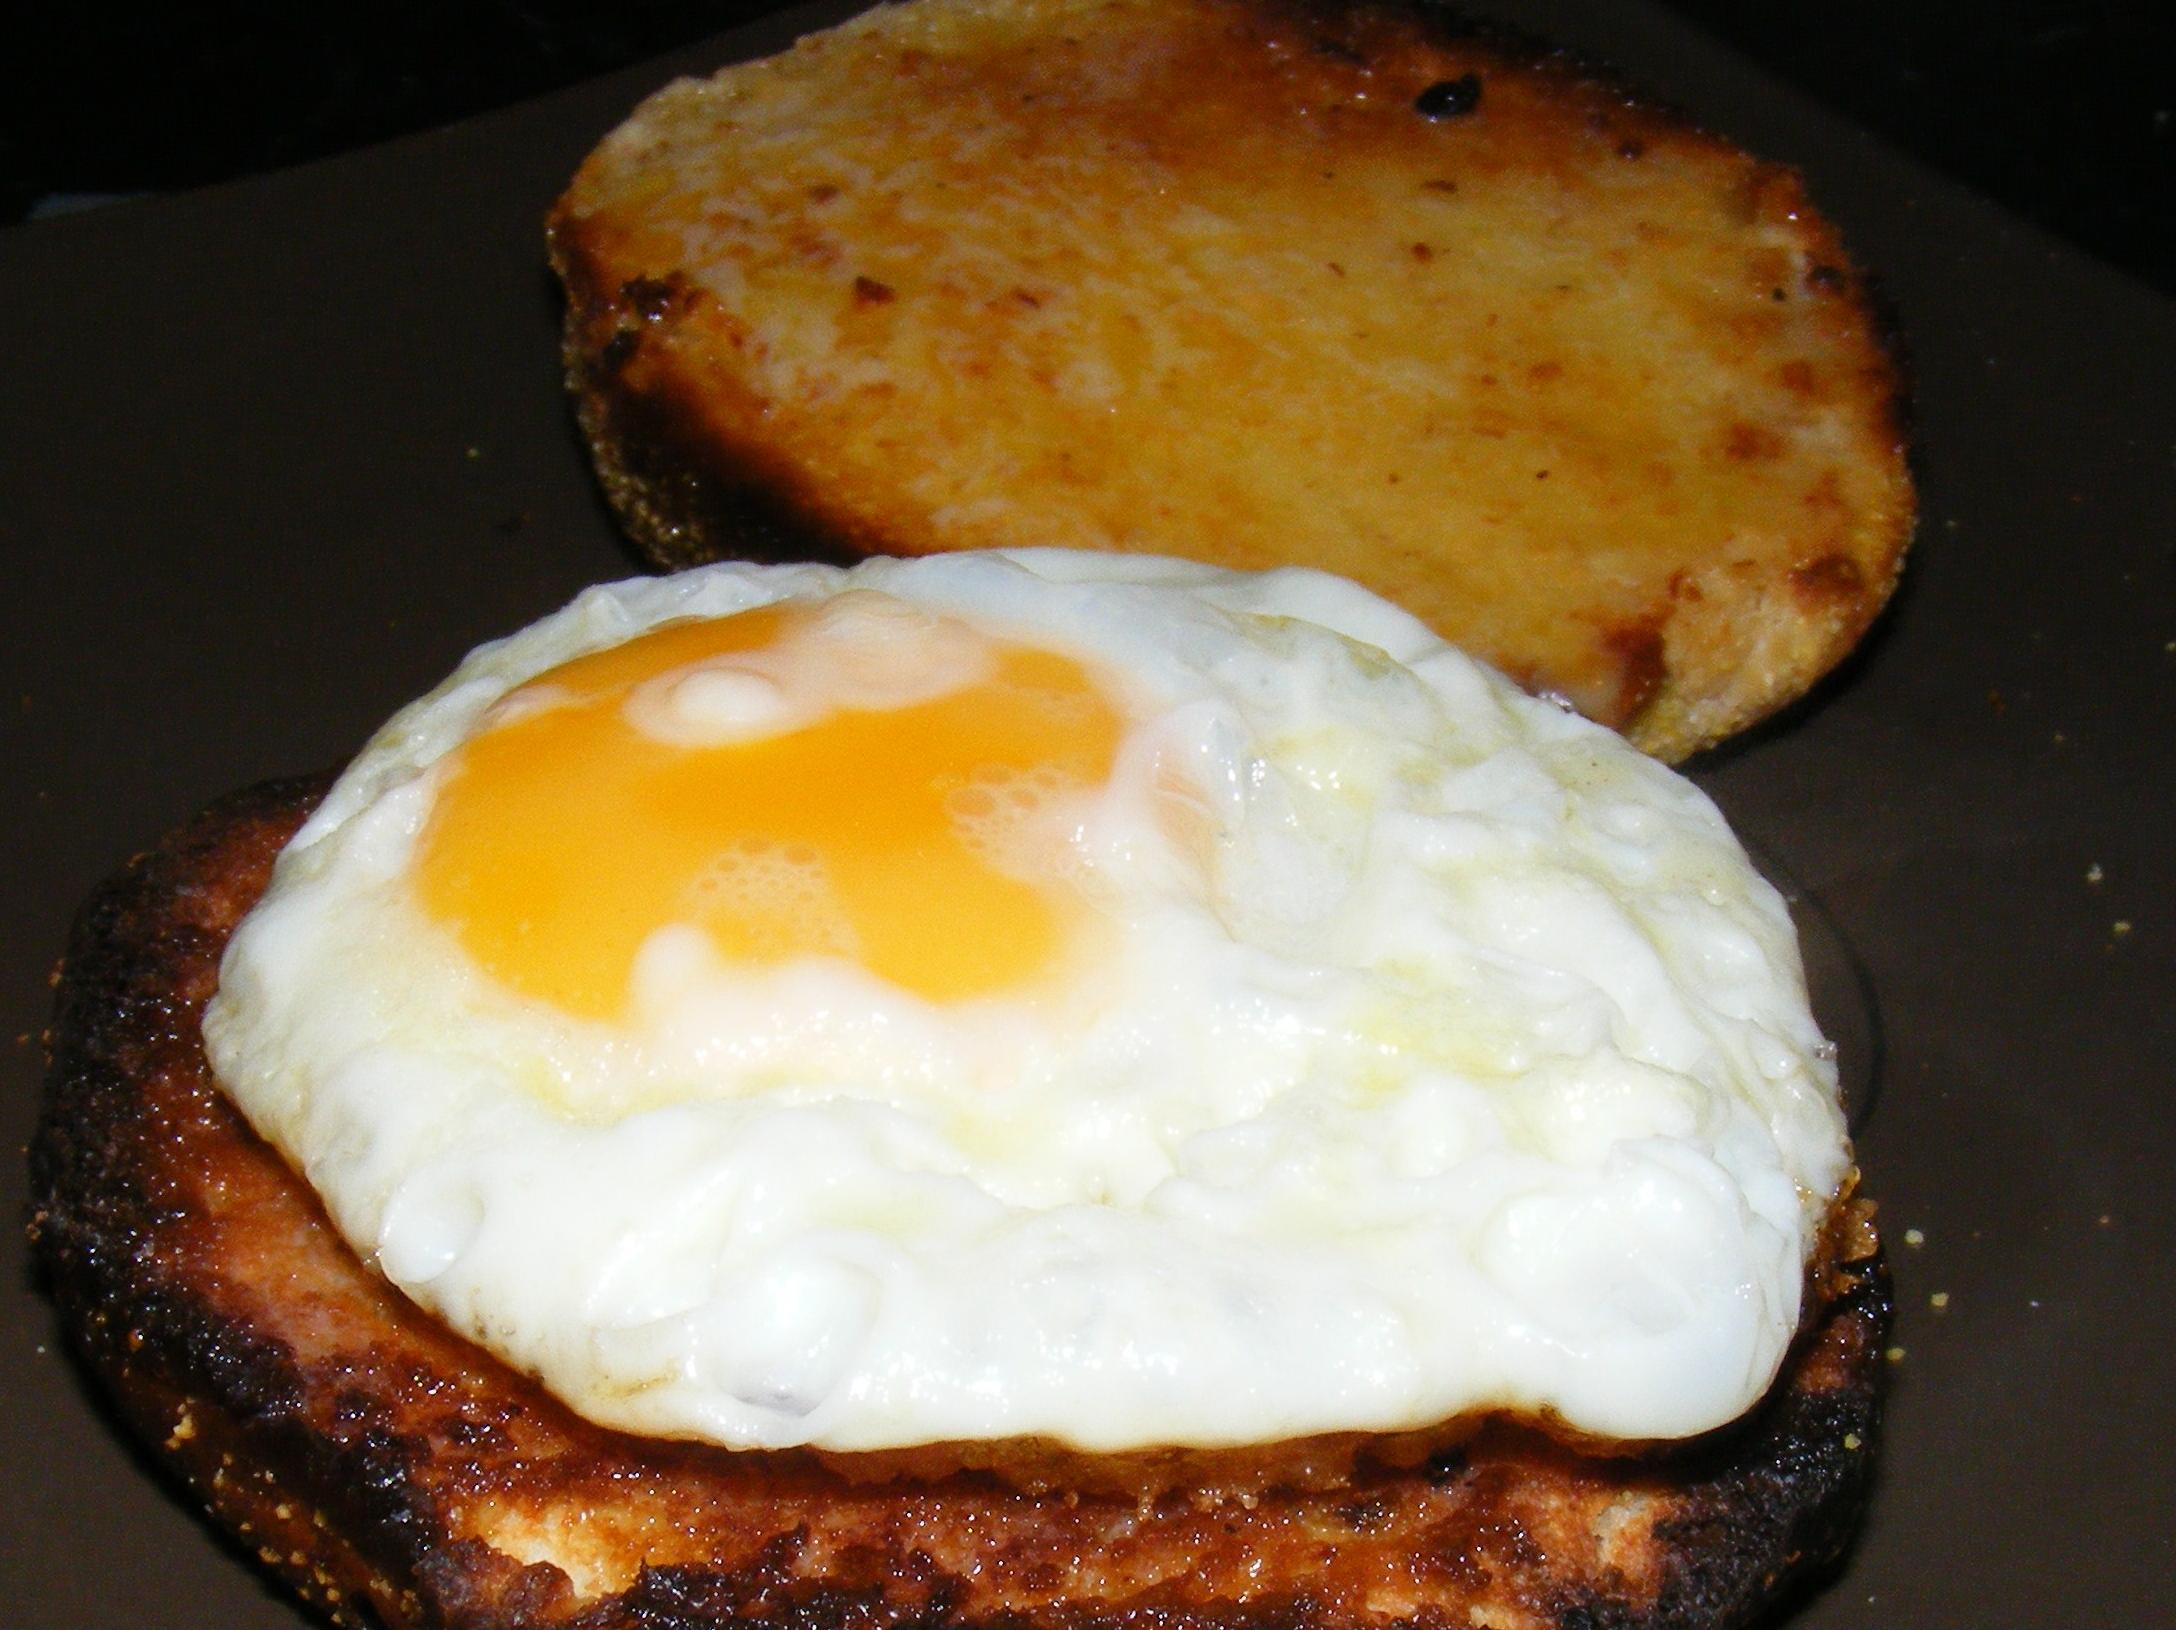  Don't skip the step of toasting the English muffins before assembling the sandwich.